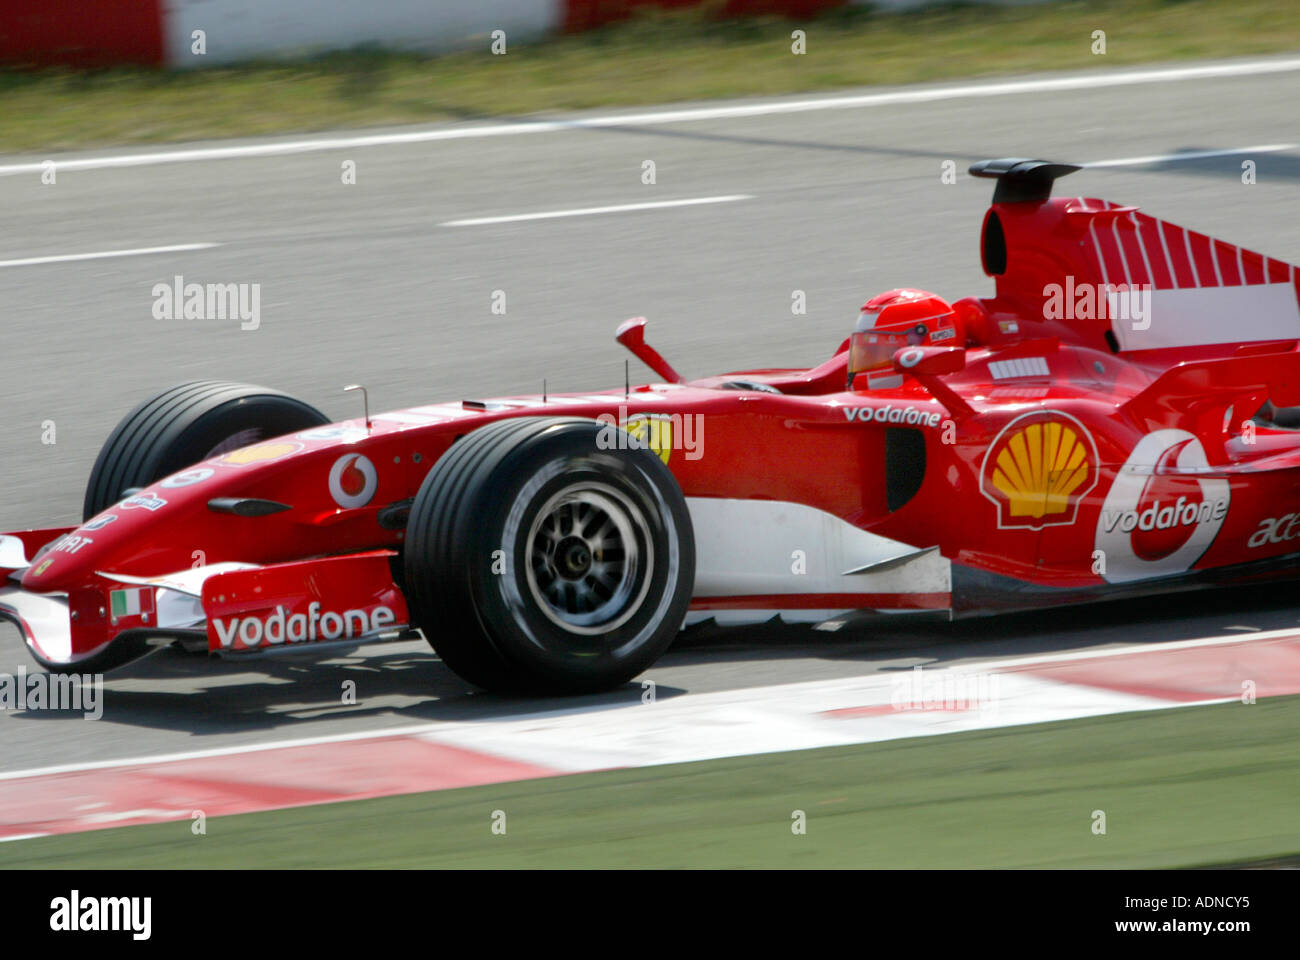 Michael Schumacher, seven times formula one world champion, competing in 2006 season at Montmelo, Barcelona Stock Photo